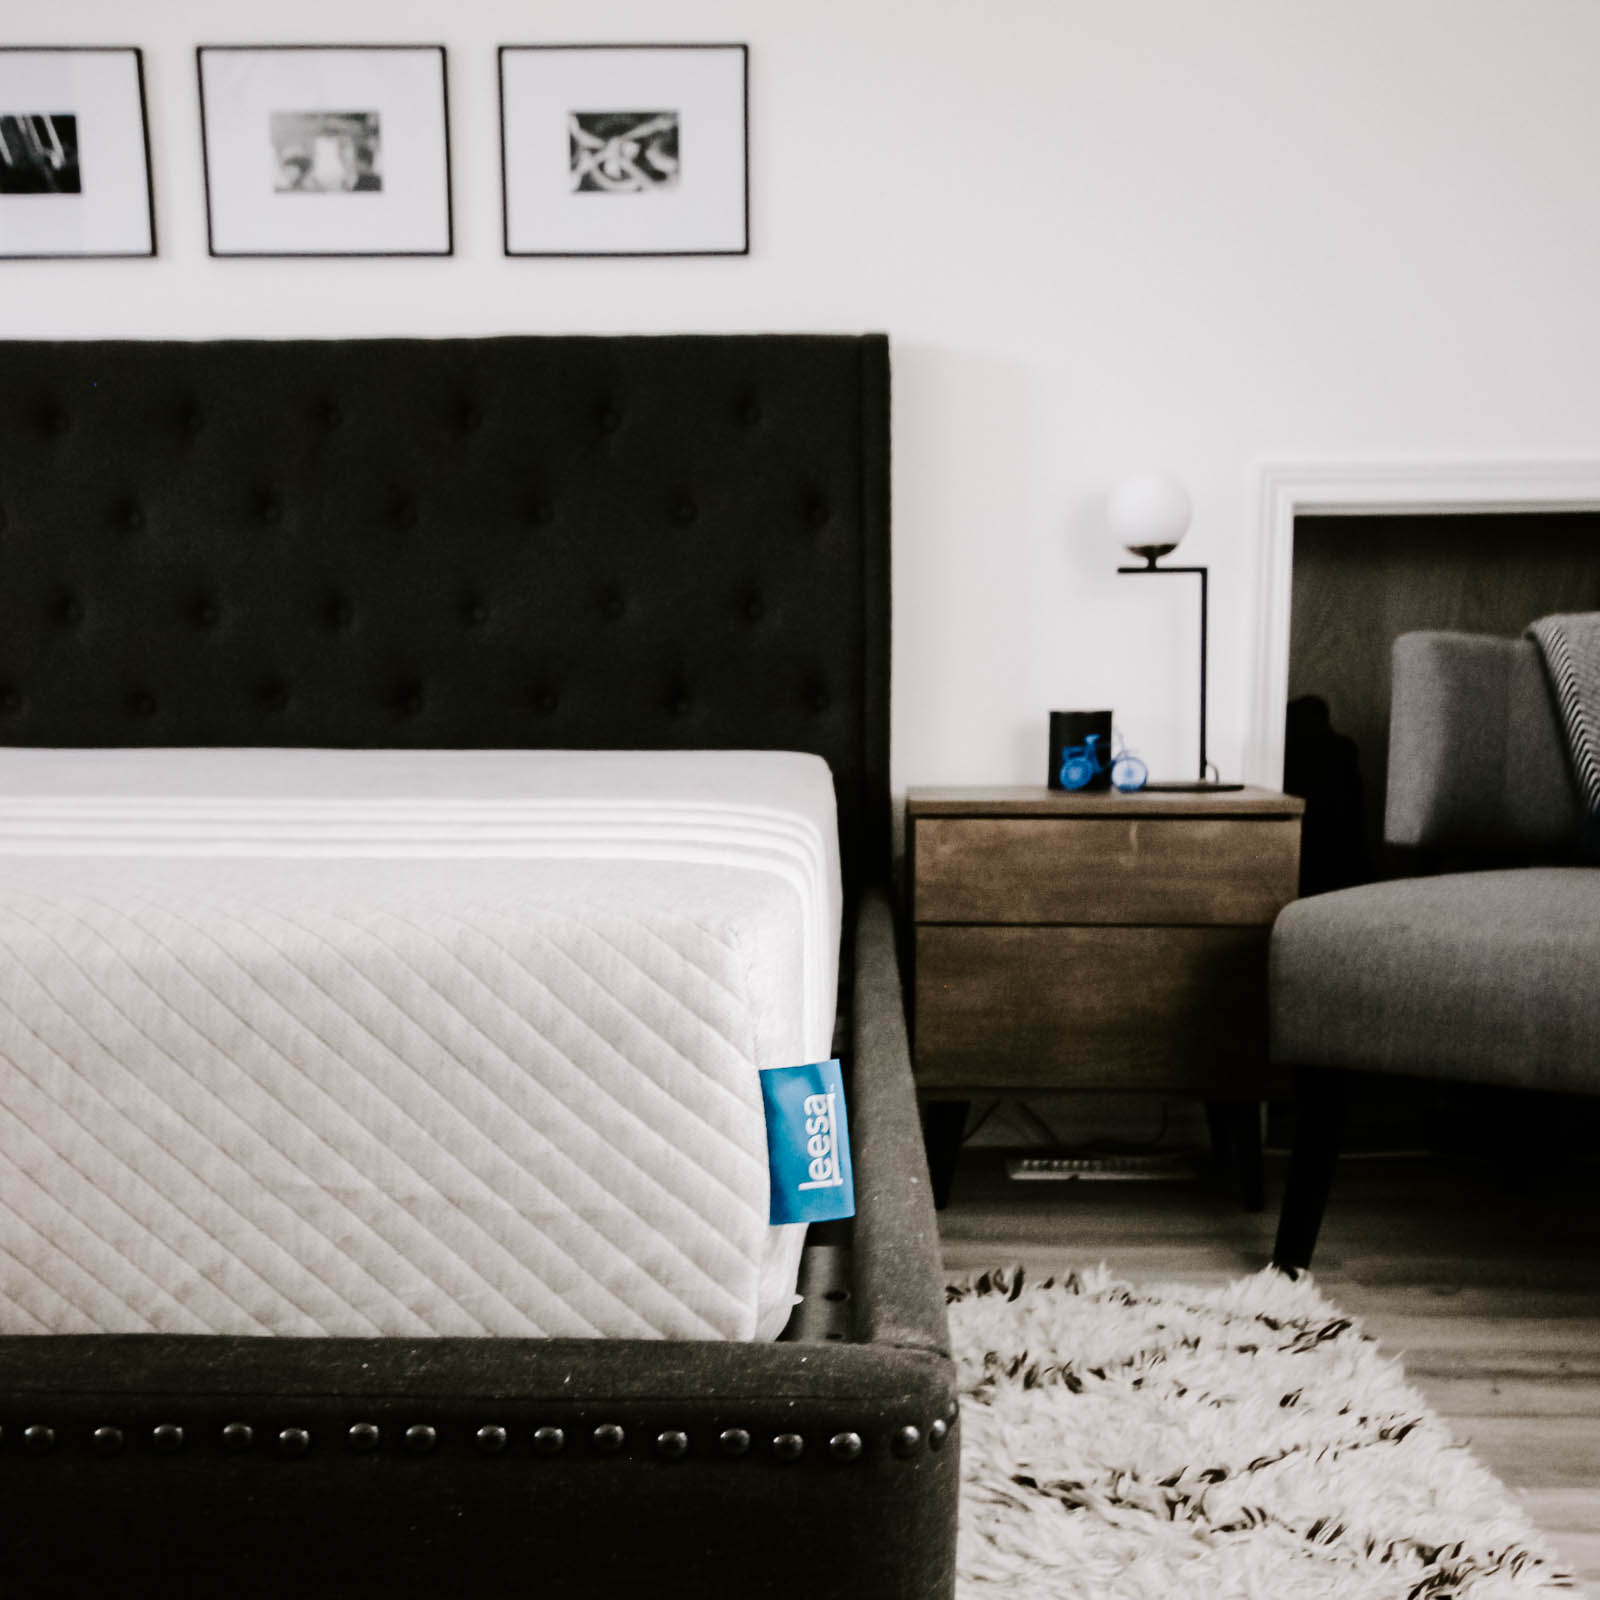 Our most comfortable mattress yet! We can't believe how well we slept after just one night on this new Leesa mattress! If you're looking for a foam mattress in a box, check out this Leesa mattress review first! #sleep #bedroom #modernbedroom